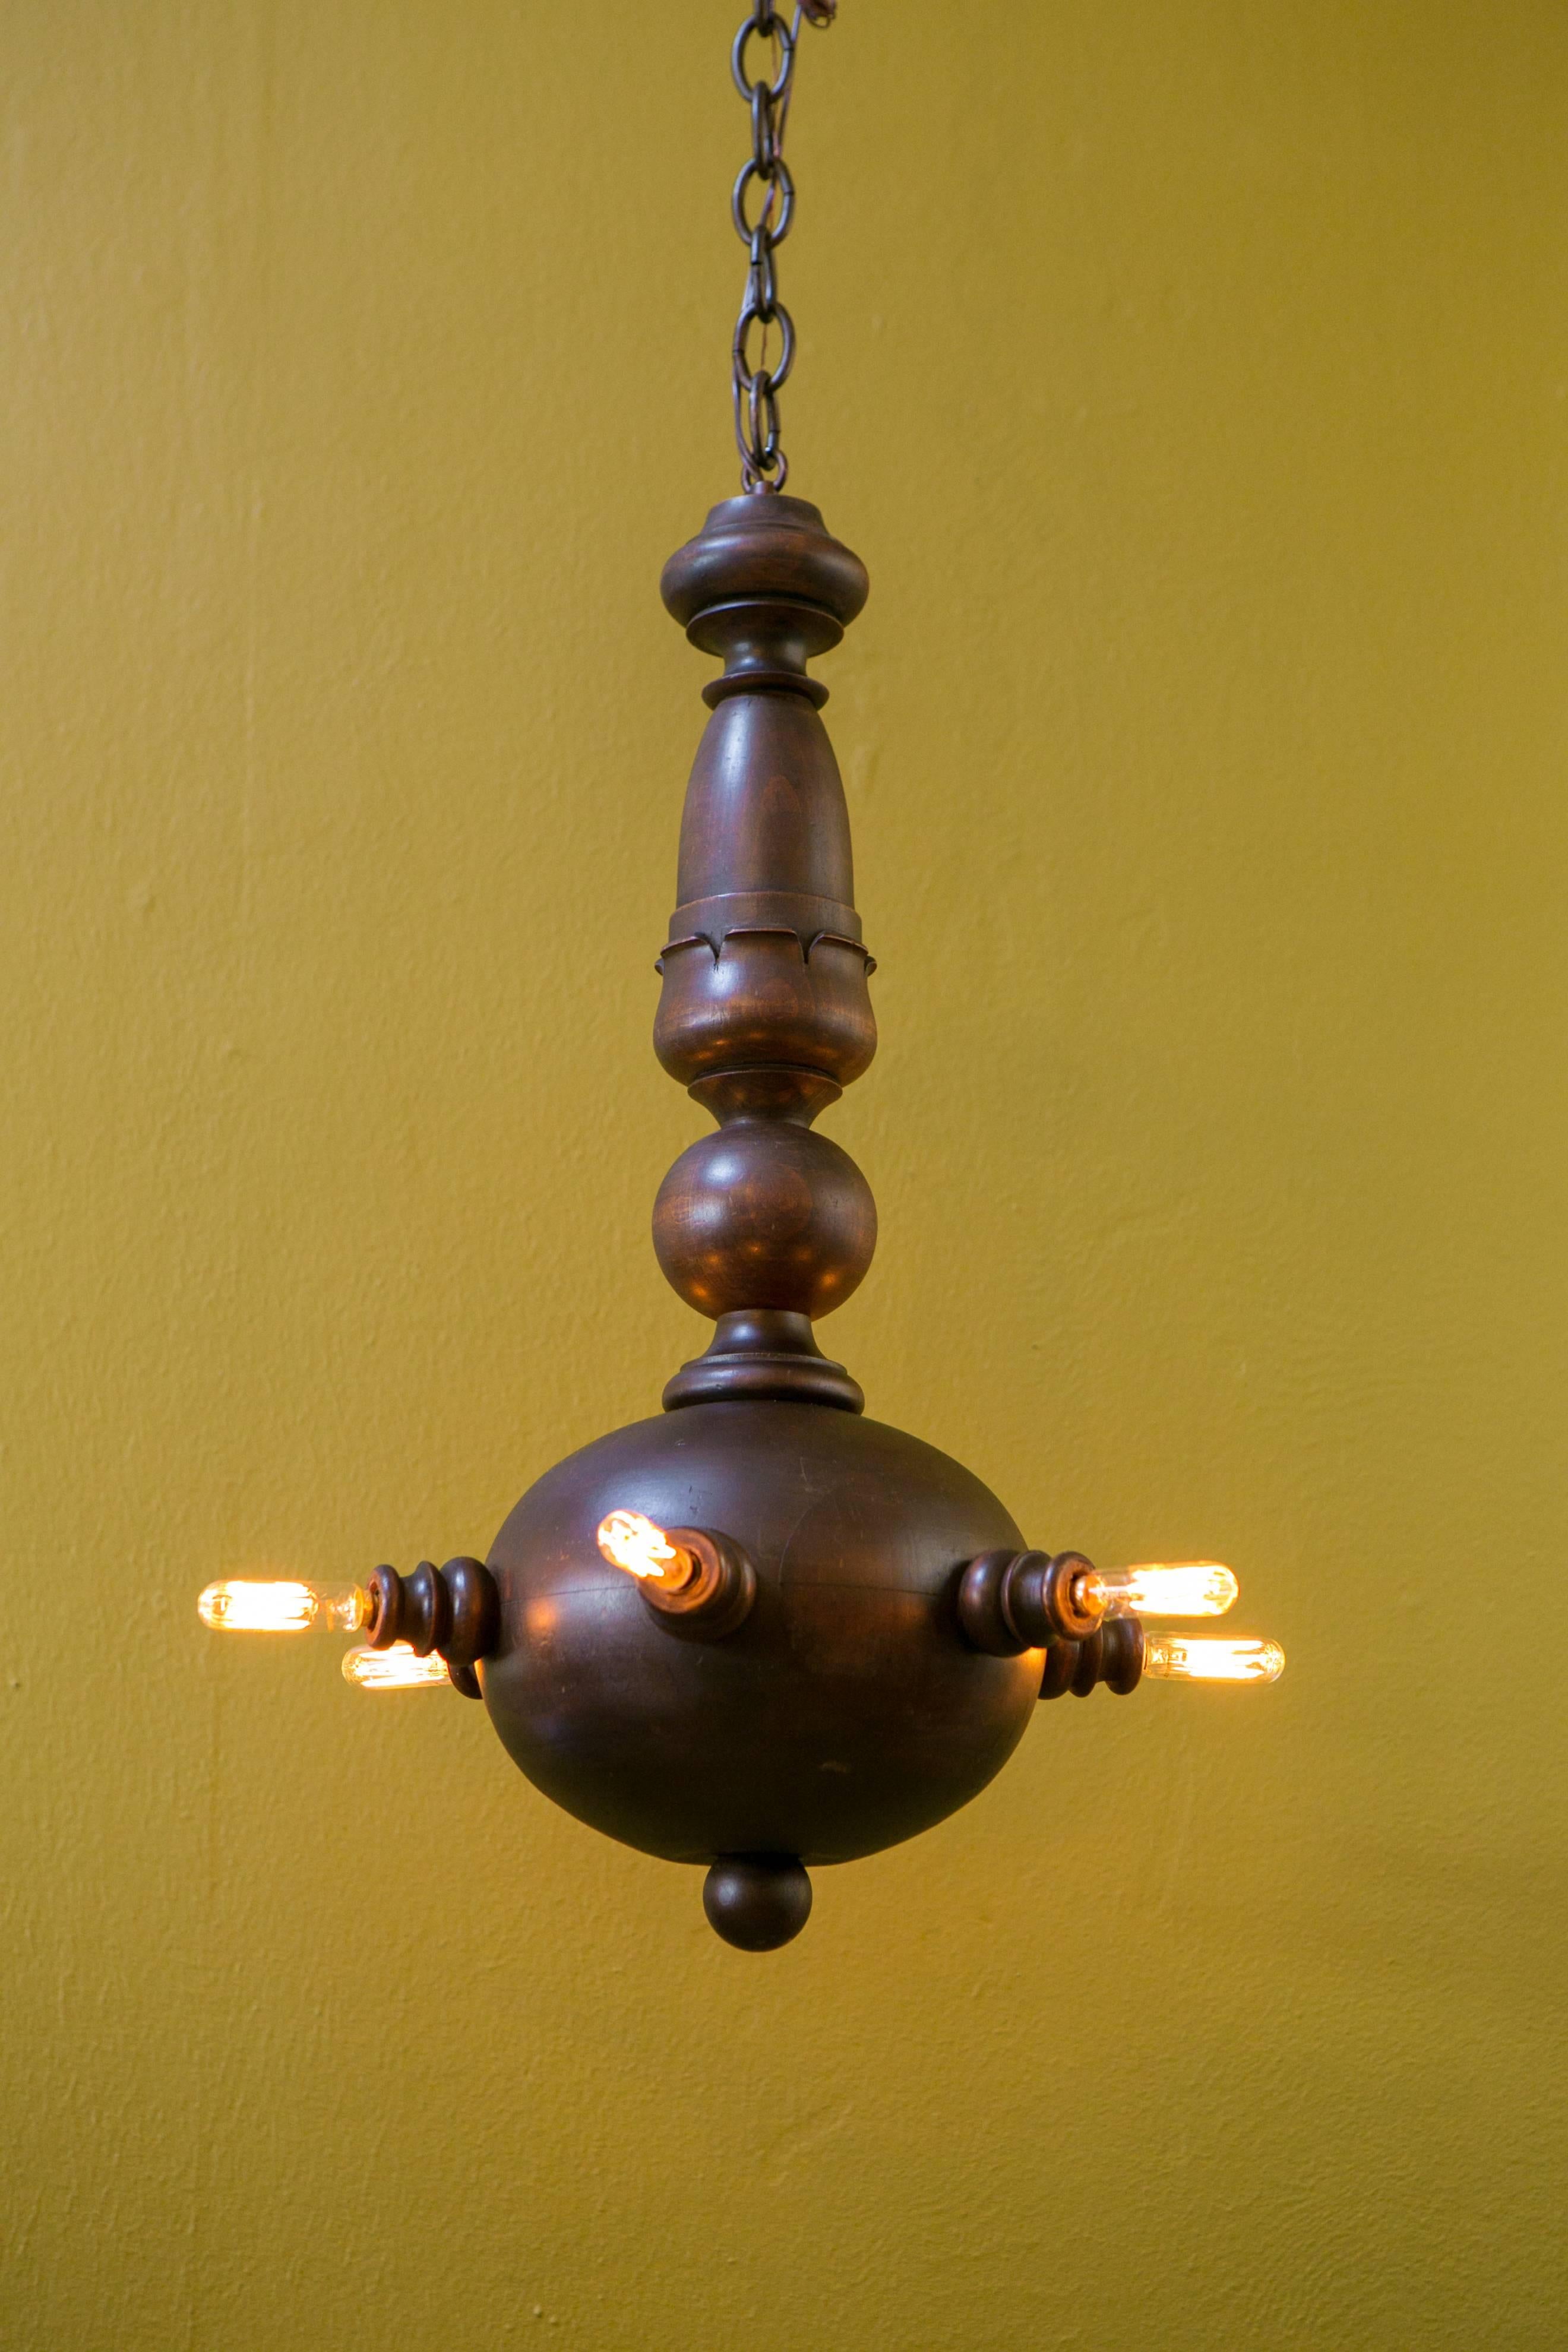 French Provincial One of a Kind Oak Ceiling Light from France, circa 1930s